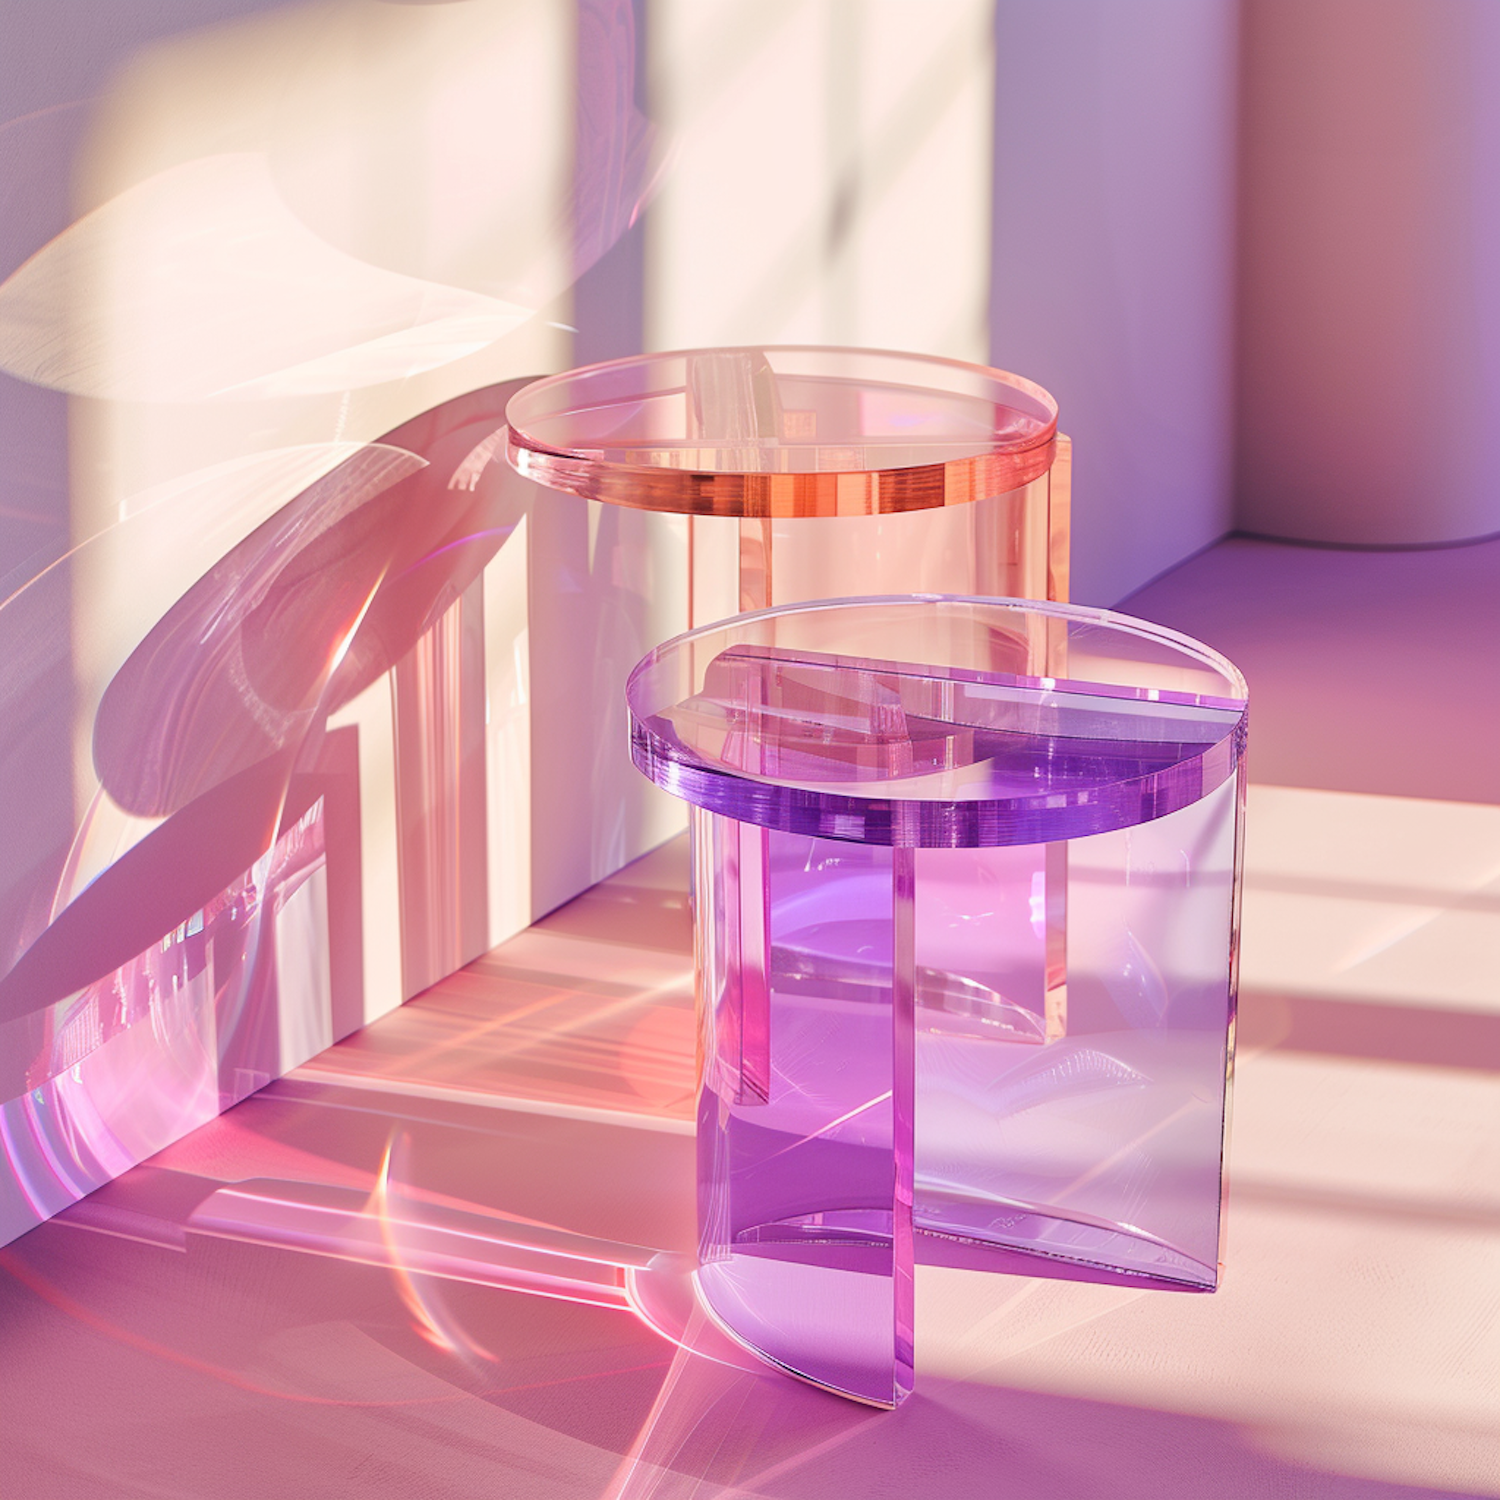 Translucent Cylinders with Colorful Light Reflections